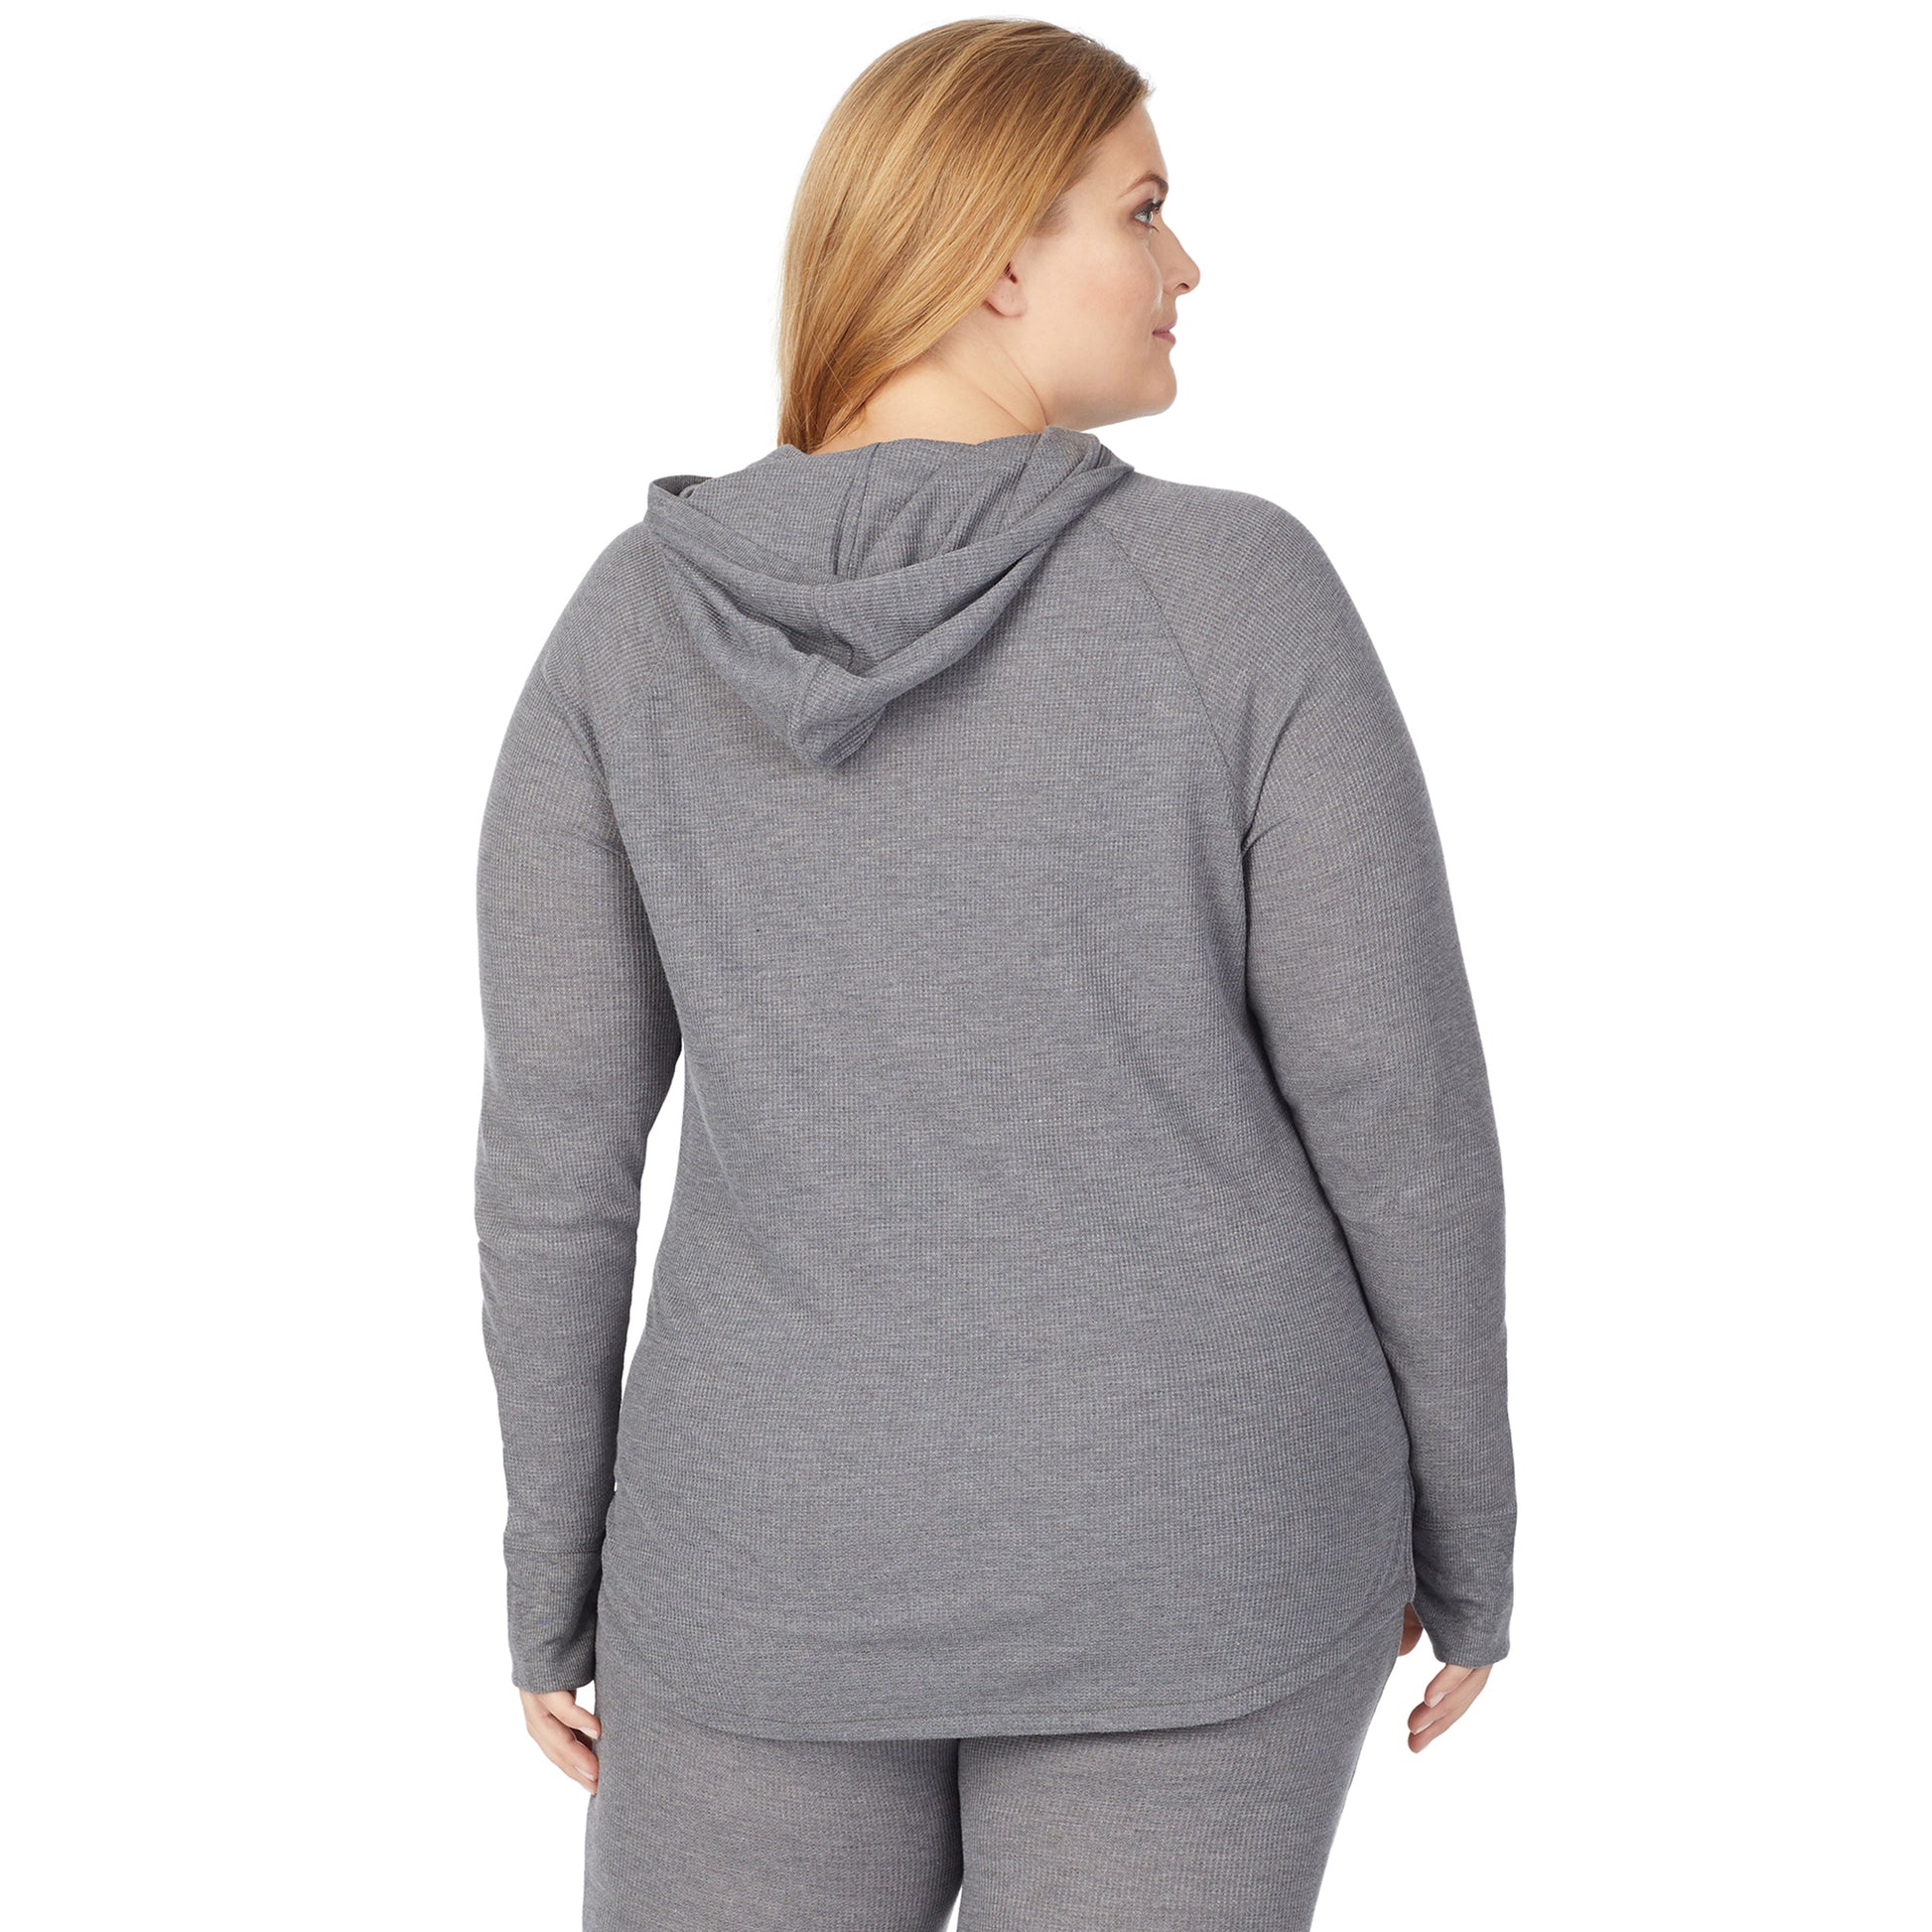 Stone Grey Heather; Model is wearing size 1X. She is 5'9", Bust 38", Waist 36", Hips 48.5". @A lady wearing a stone grey heather long sleeve hoodie tunic plus.